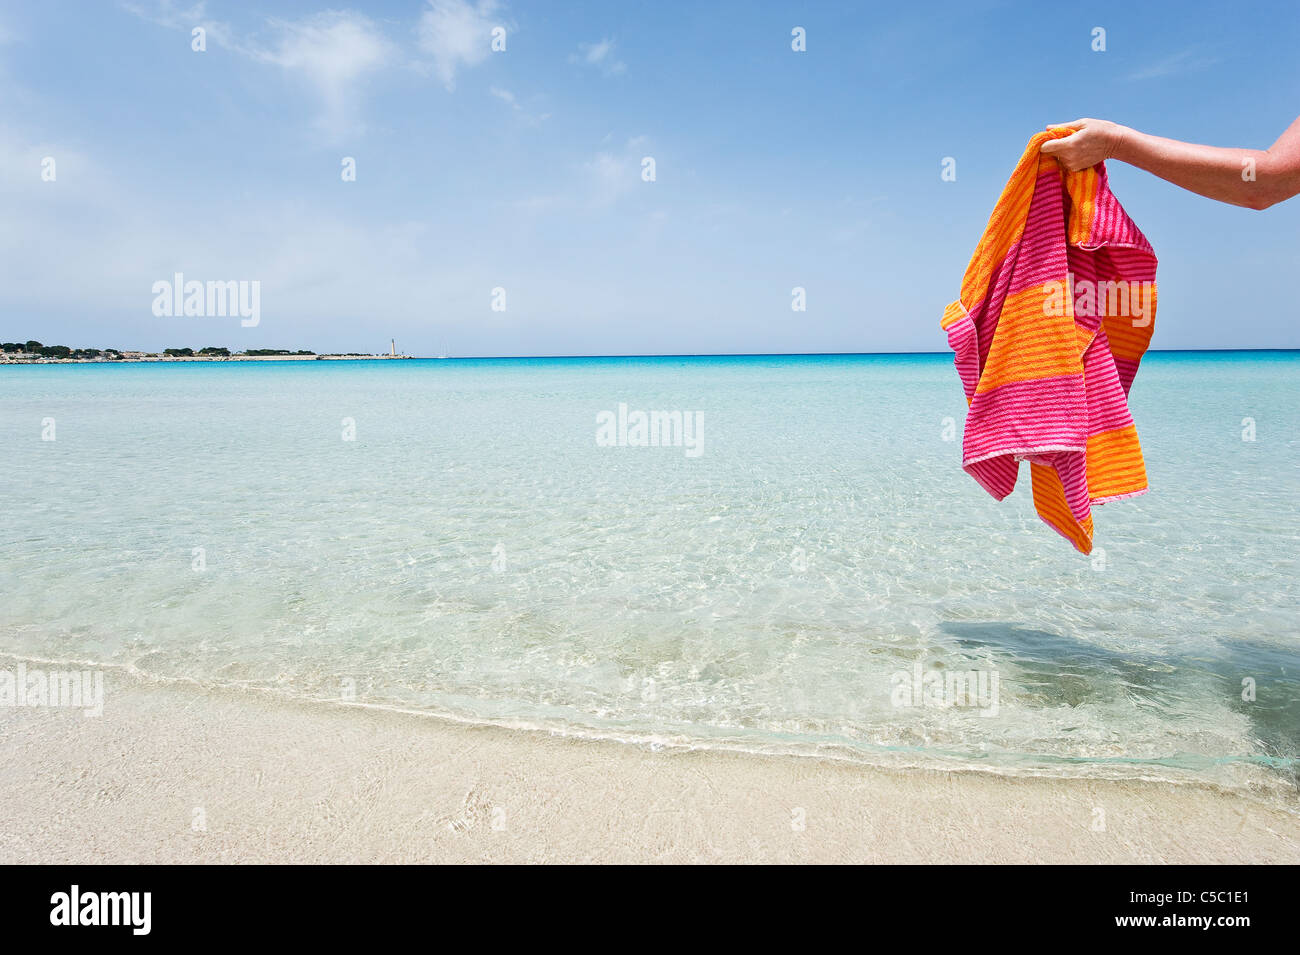 Hand holding towel at water's edge on a peaceful beach Stock Photo